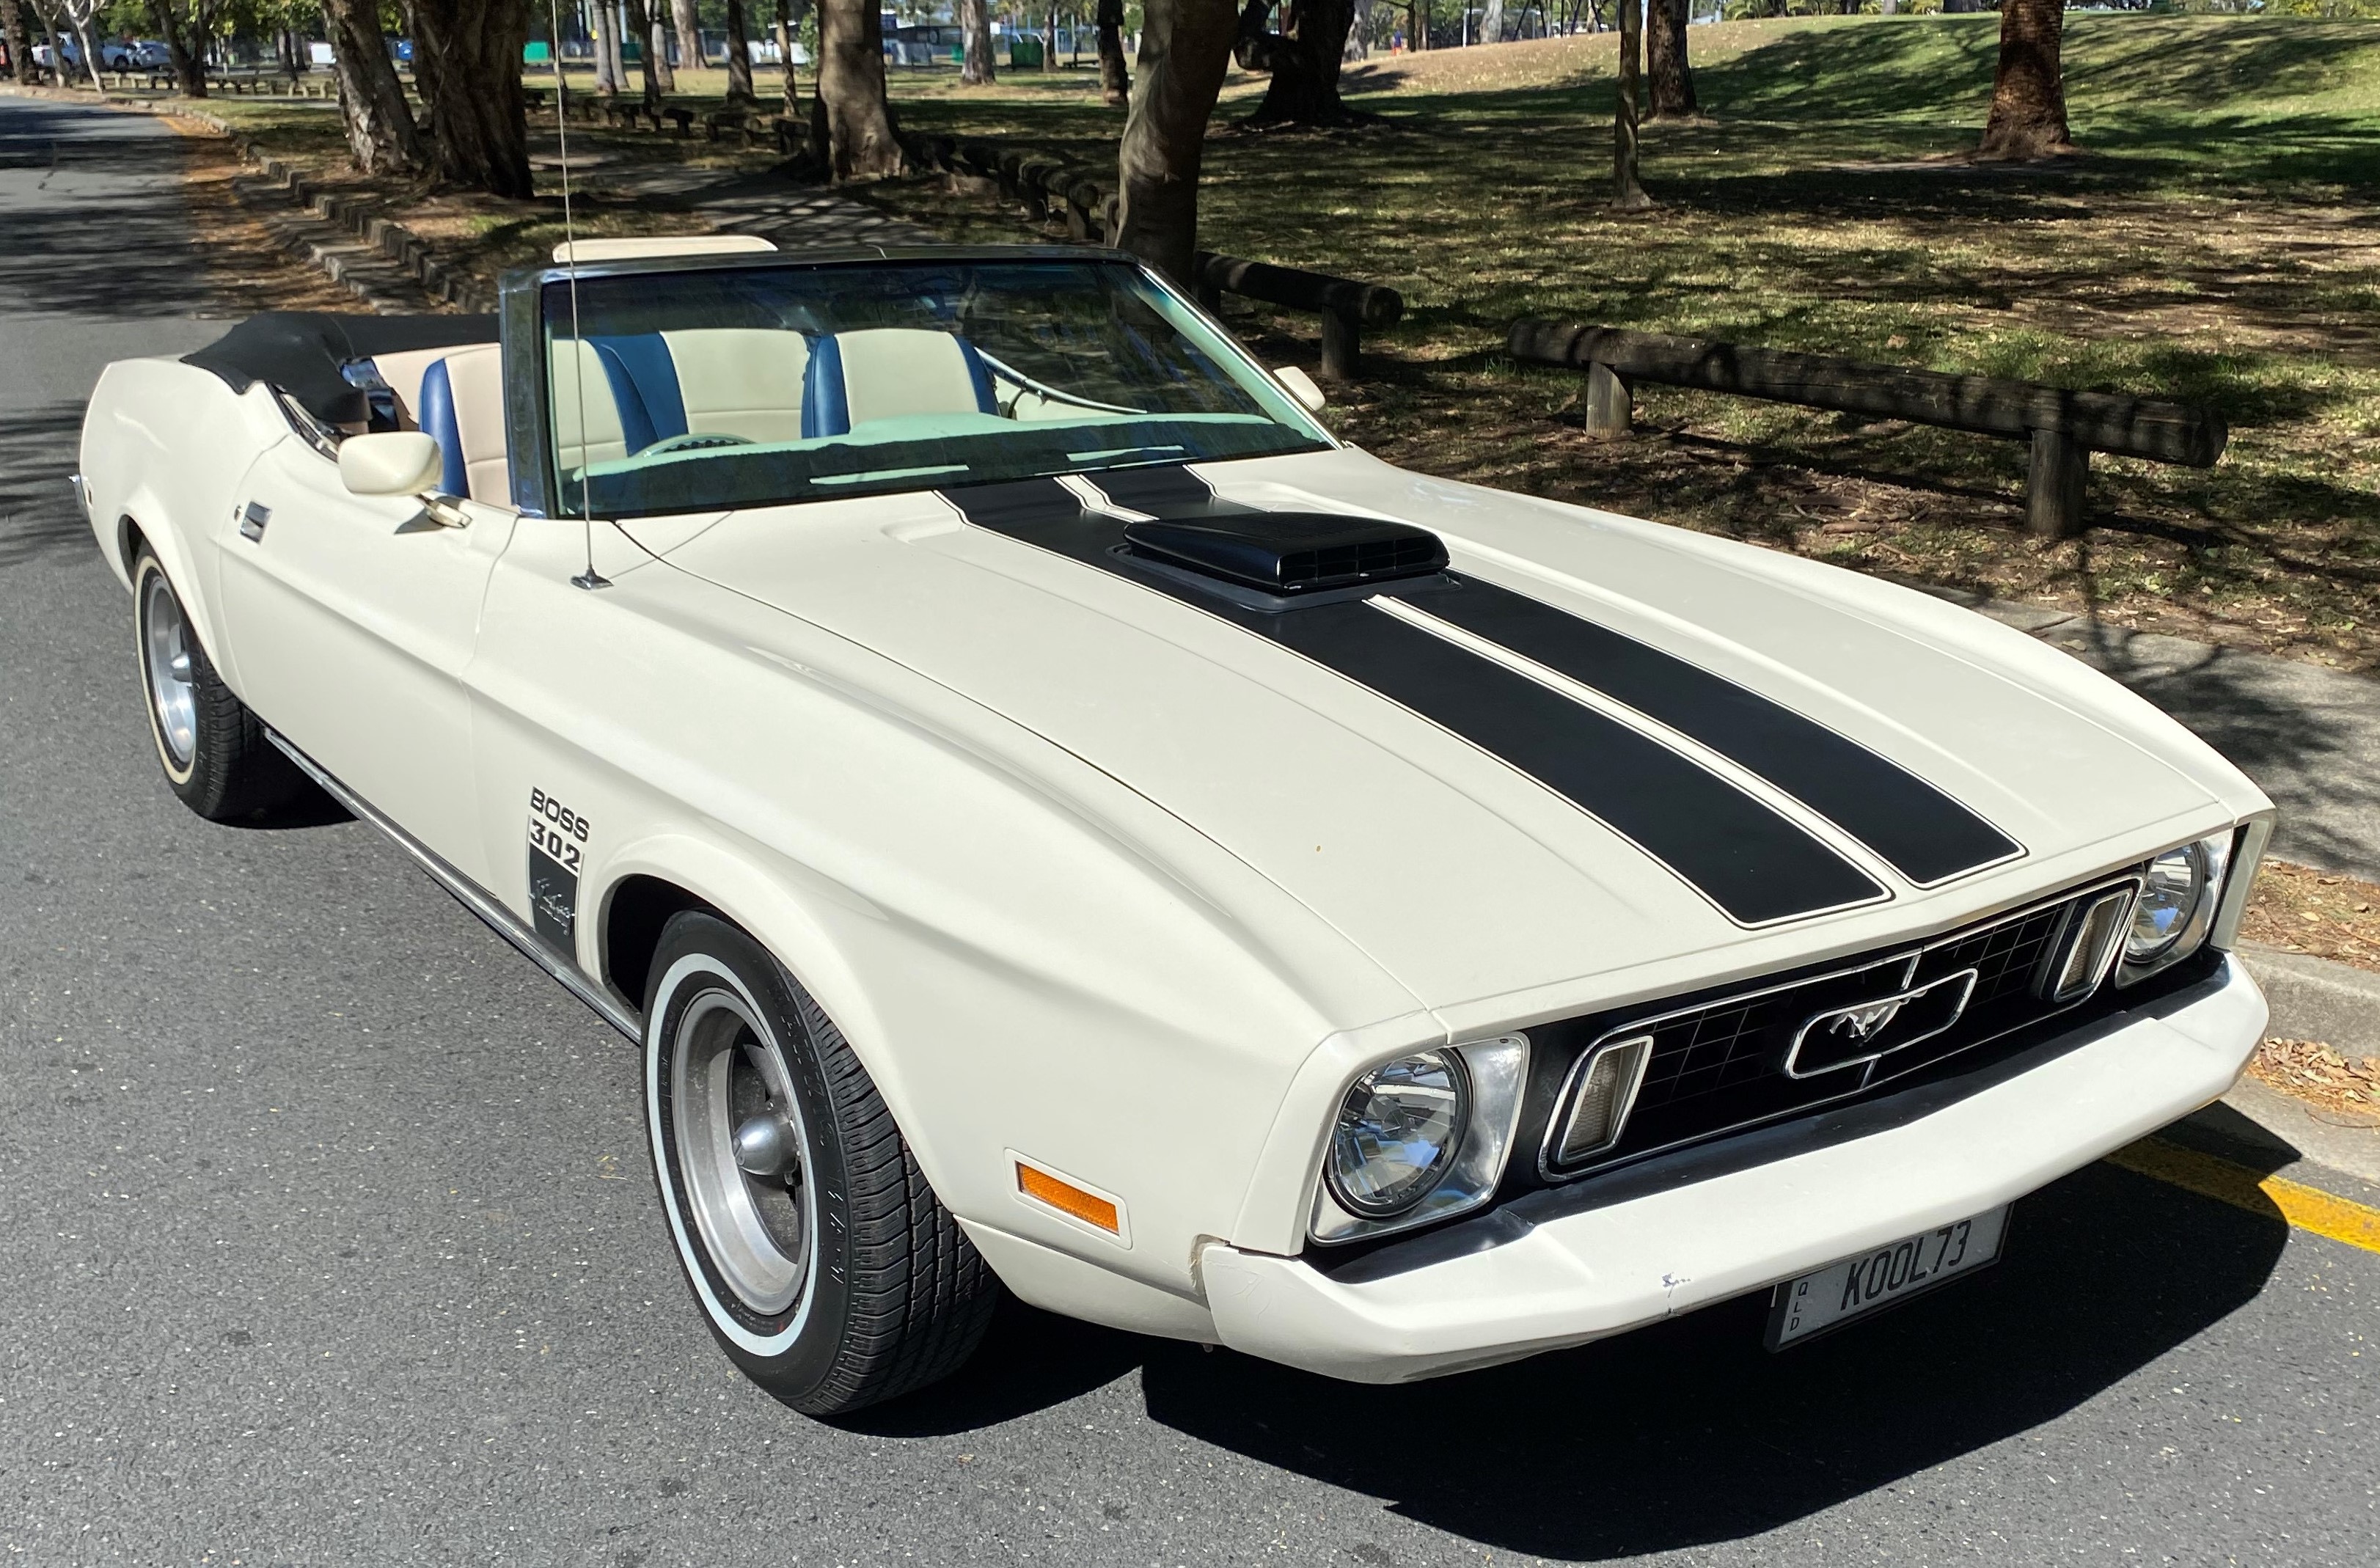 “The Boss” – 1973 Boss Mustang Convertible. From $490 per day.